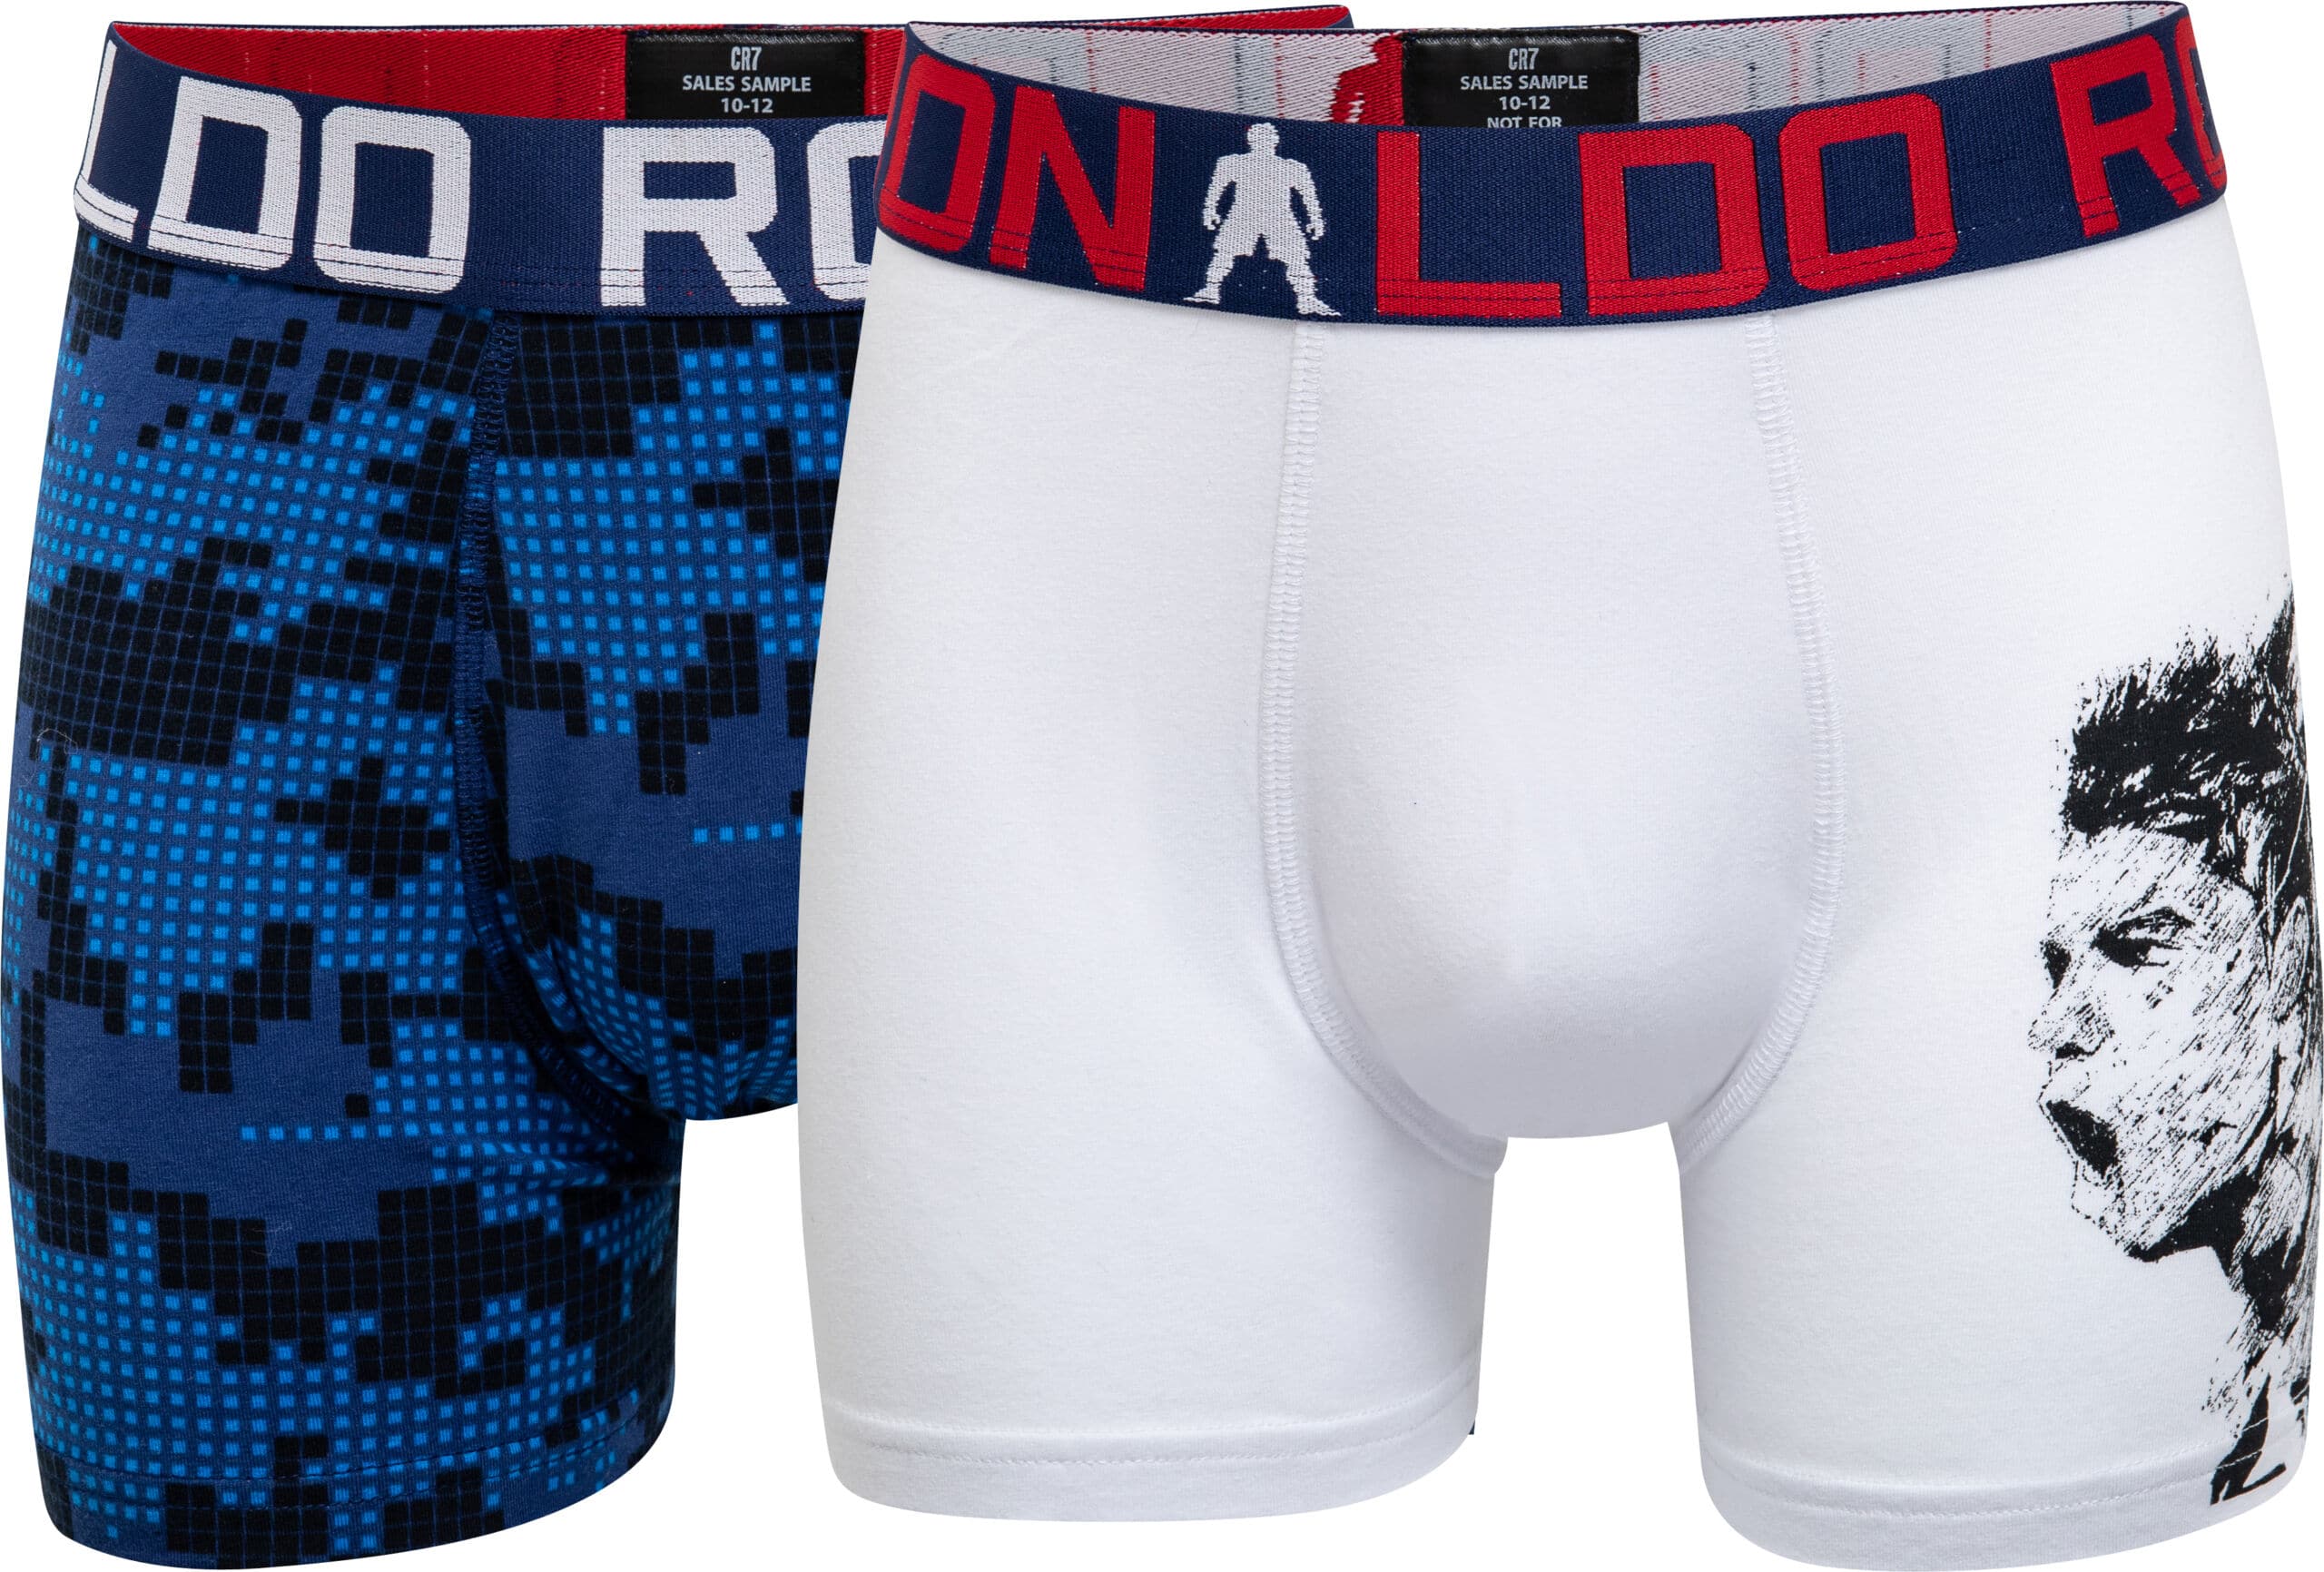 CR7 Boy's Trunk 2-pack - Solid White/AOP